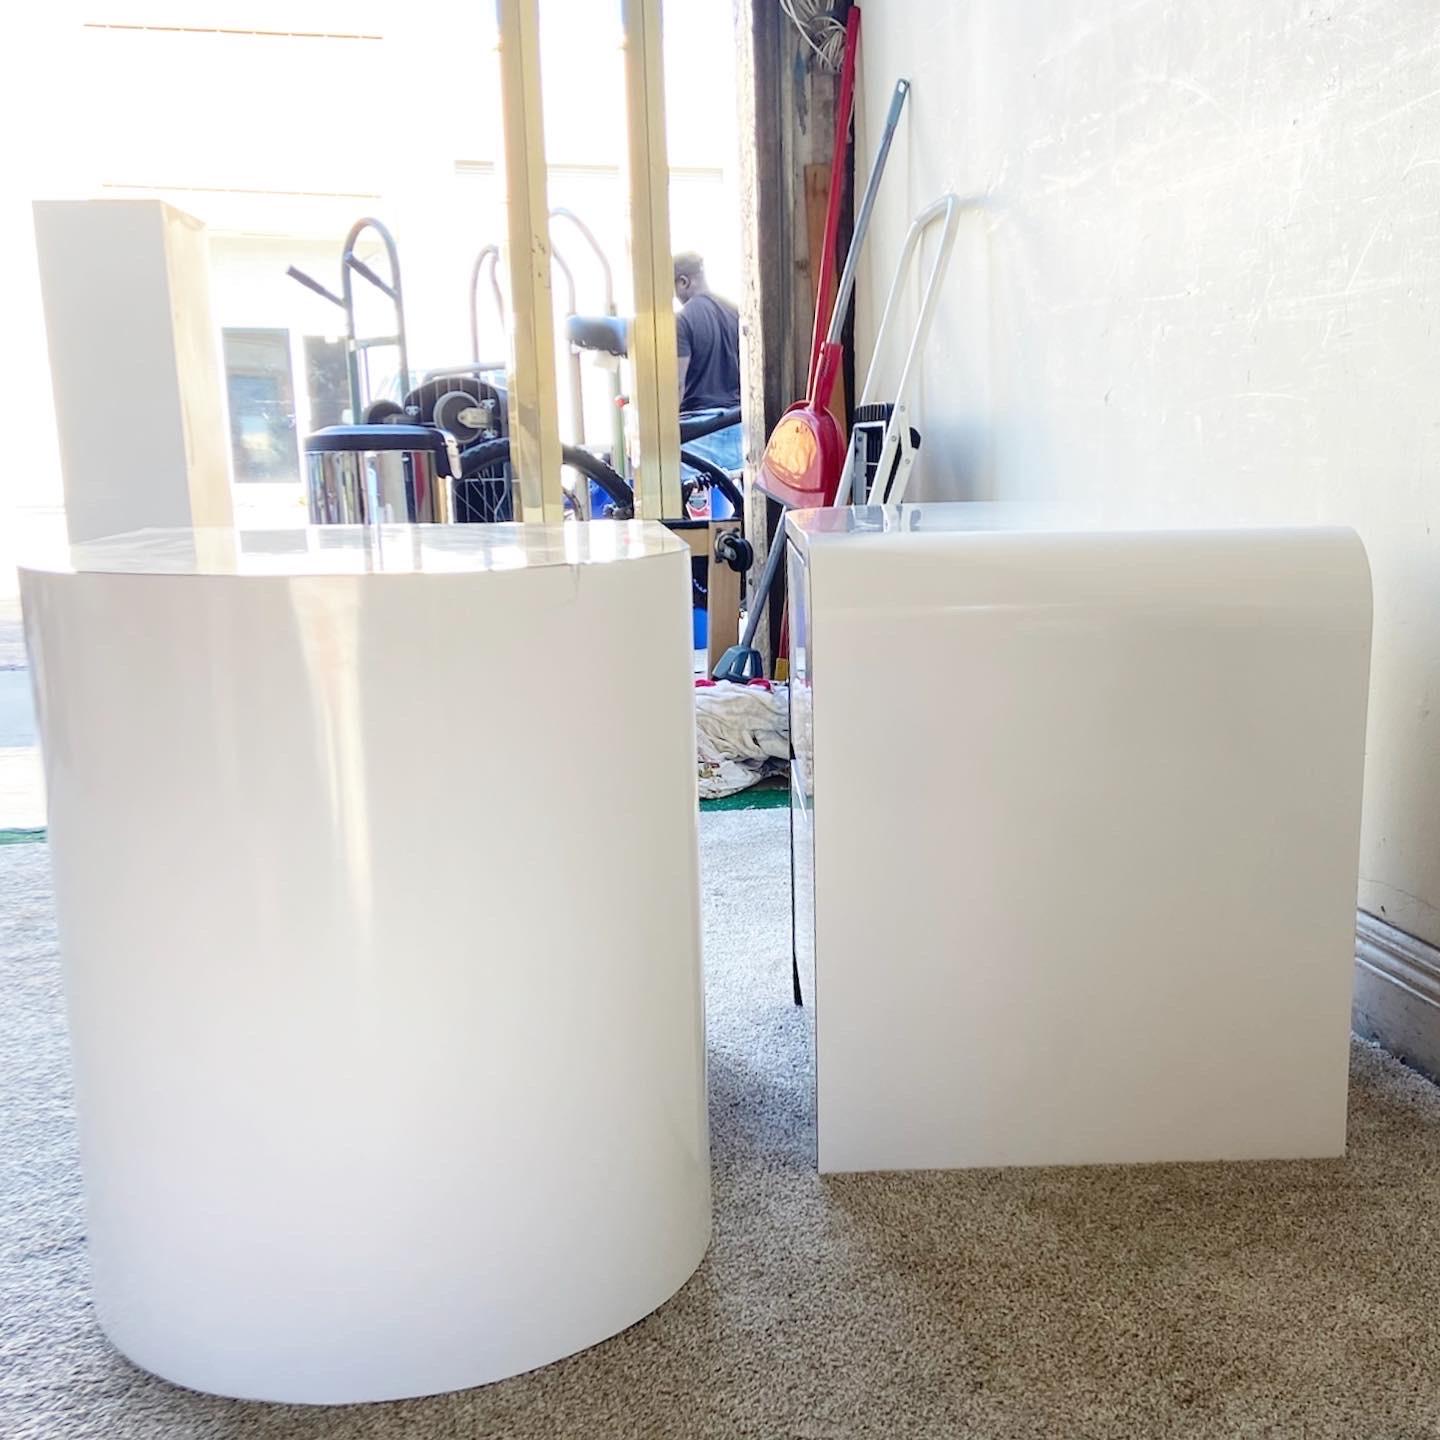 Late 20th Century 1980s Postmodern White and Black Lacquer Laminate Nightstands - a Pair